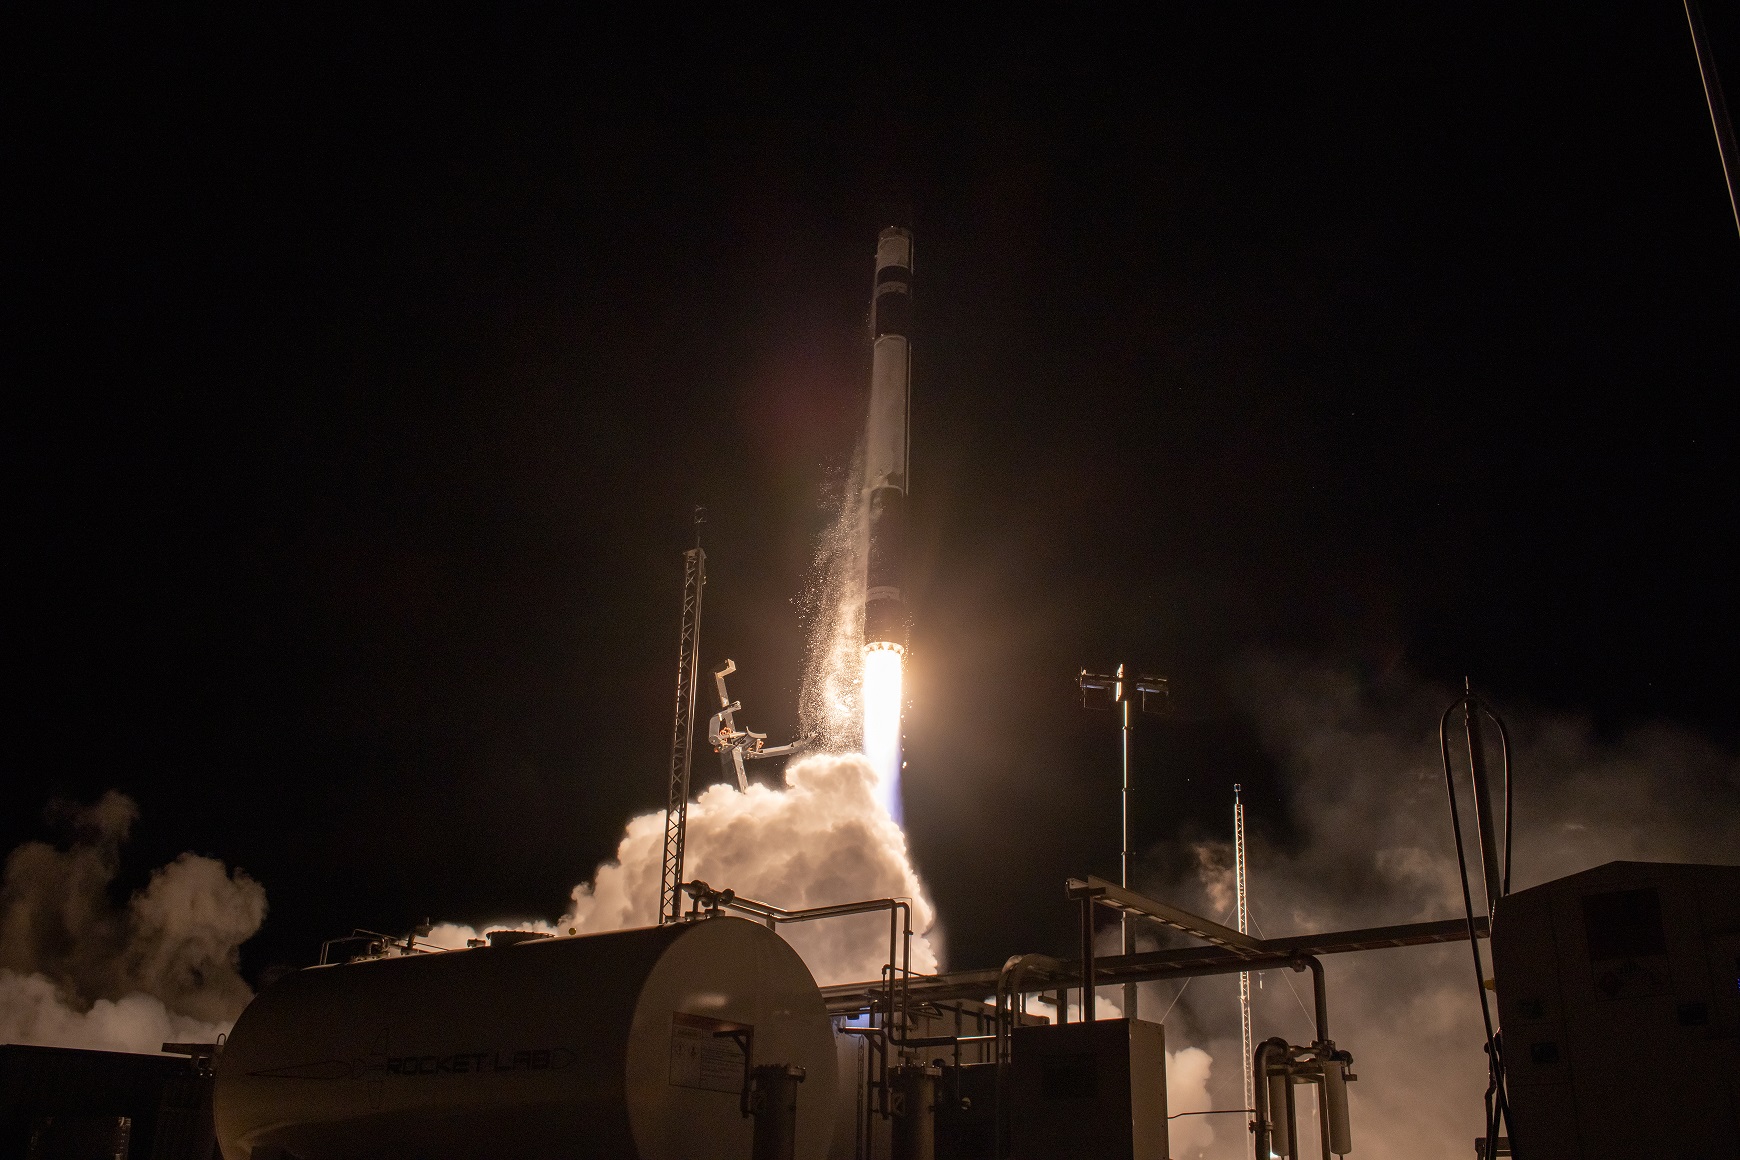 The Owl's Night Begins lifts off the pad